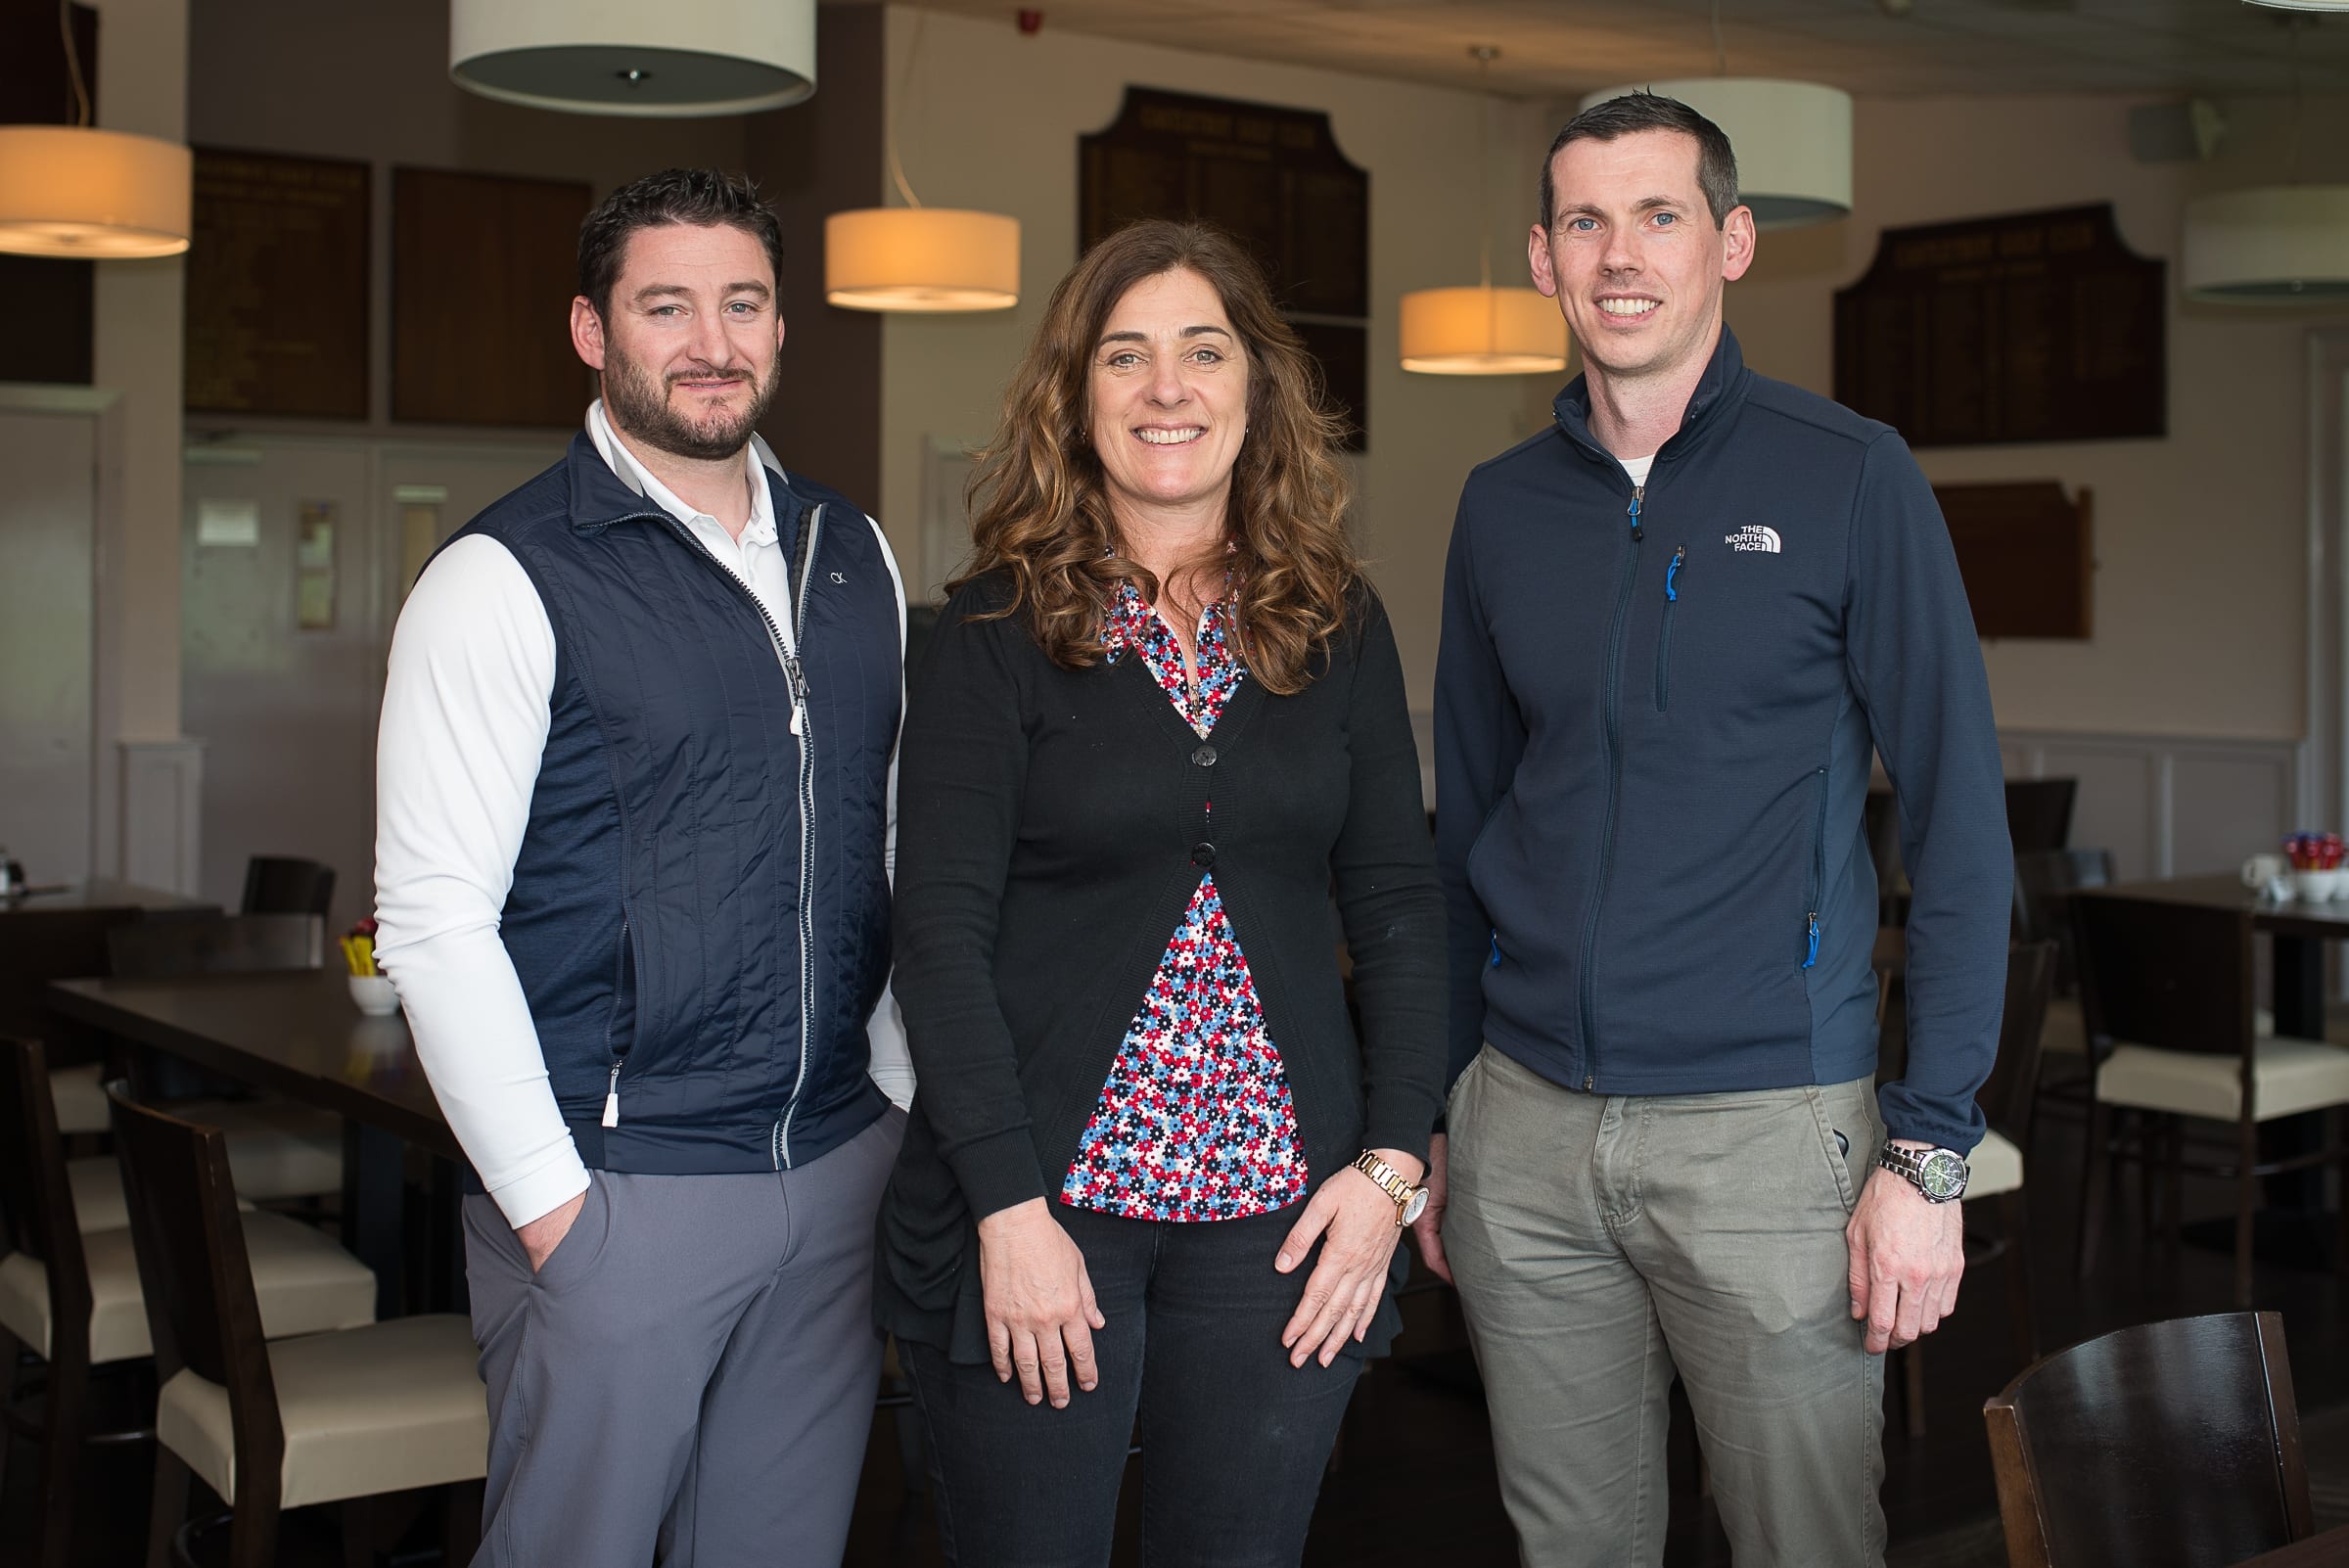 Limerick Chamber together with Castletroy Golf club proudly present: Go Golfing for Business Series, which took place on 17th May in Castletroy Golf Club, Liemrick - from left to right: Keith Mathews - Metis Ireland, Enda Kavanagh - Cregg Recruitment, Paraic Rattigan - Confirm Smart Manufacturing.